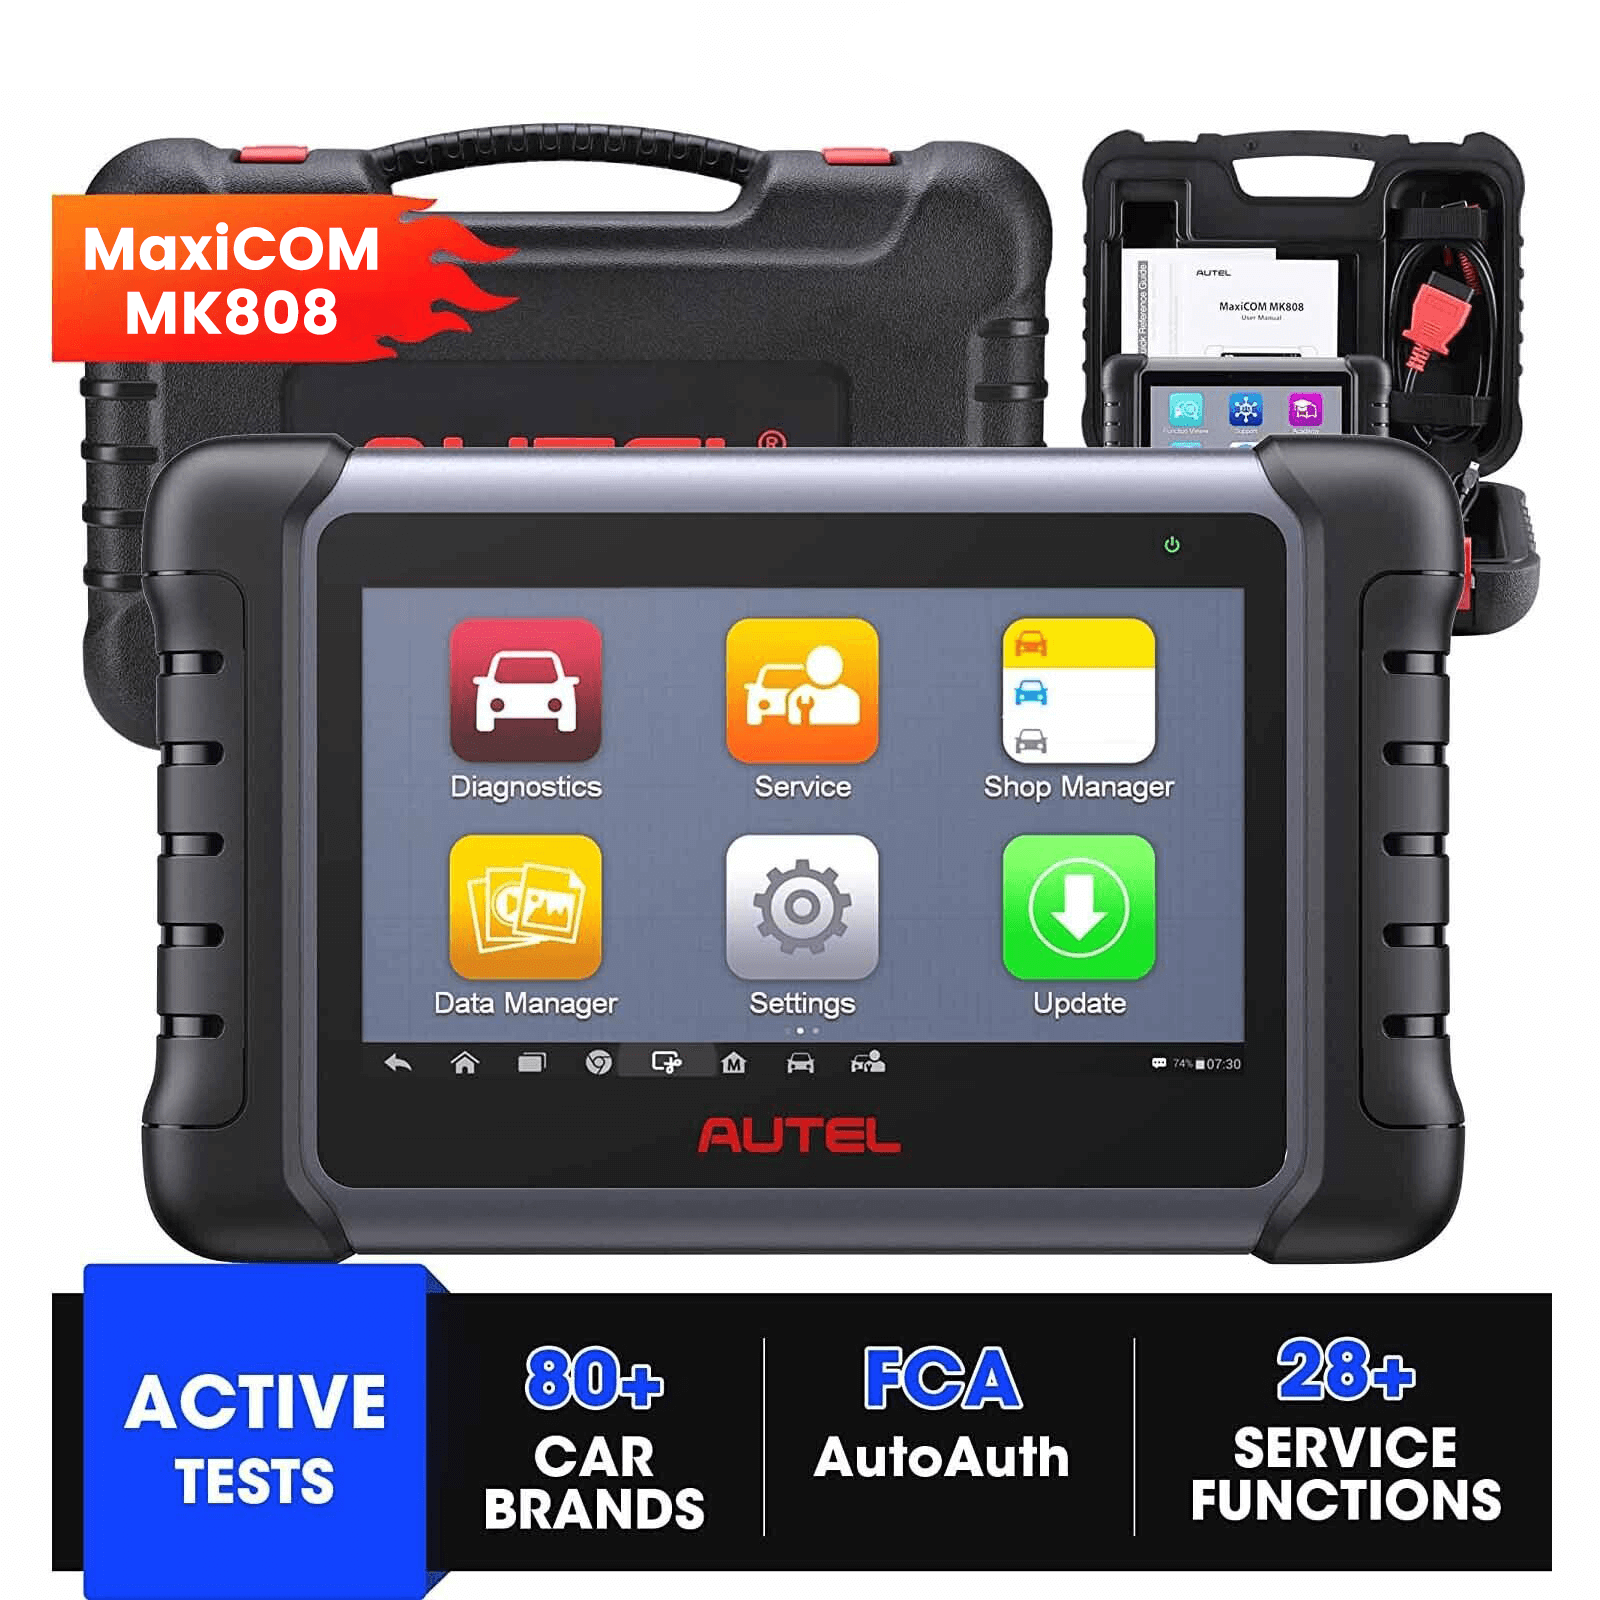 Autel MaxiCOM MK808Z Vehicle Diagnostic OBD2 Scanner, Upgraded of MK808/MX808, Android 11 Based Bi-Directional Control Scan Tool, 28+ Services